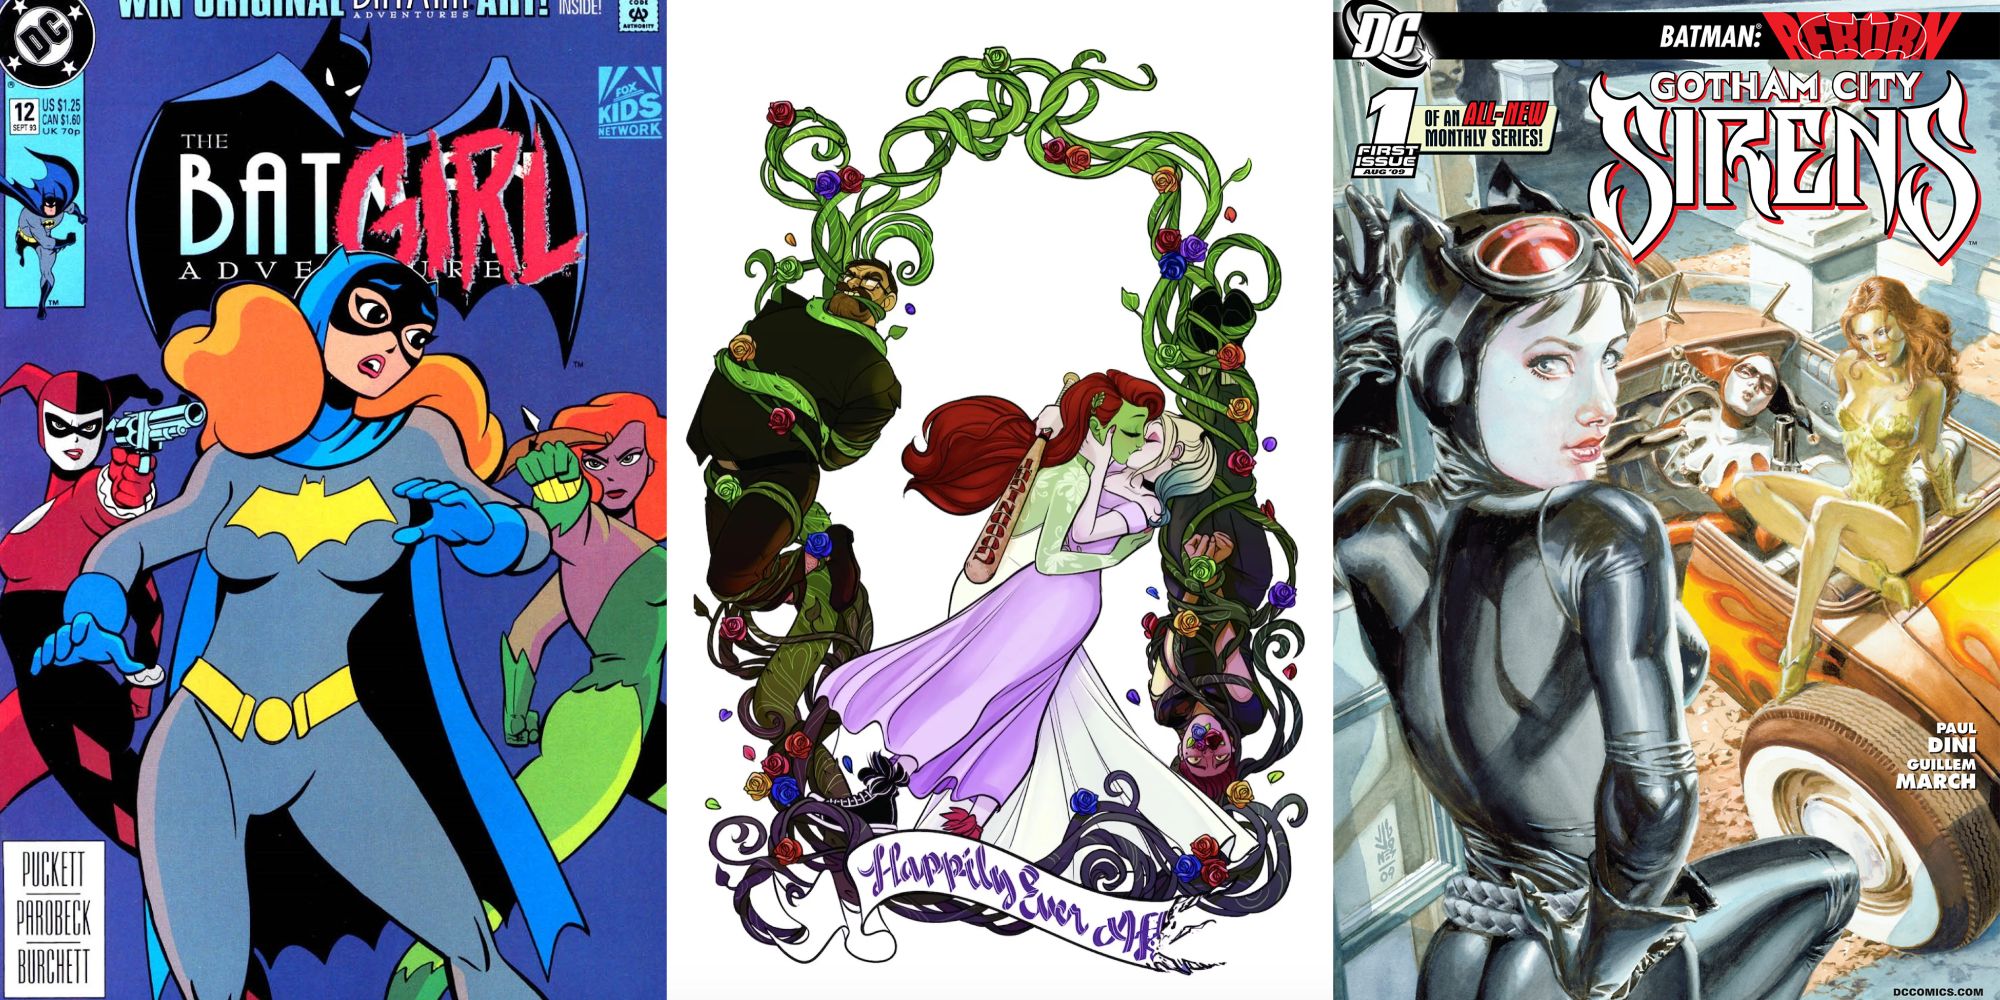 Split image of covers for Batman Adventures 12, Harley Quinn Eat Bang Kill Tour 1, and Gotham City Sirens 1.